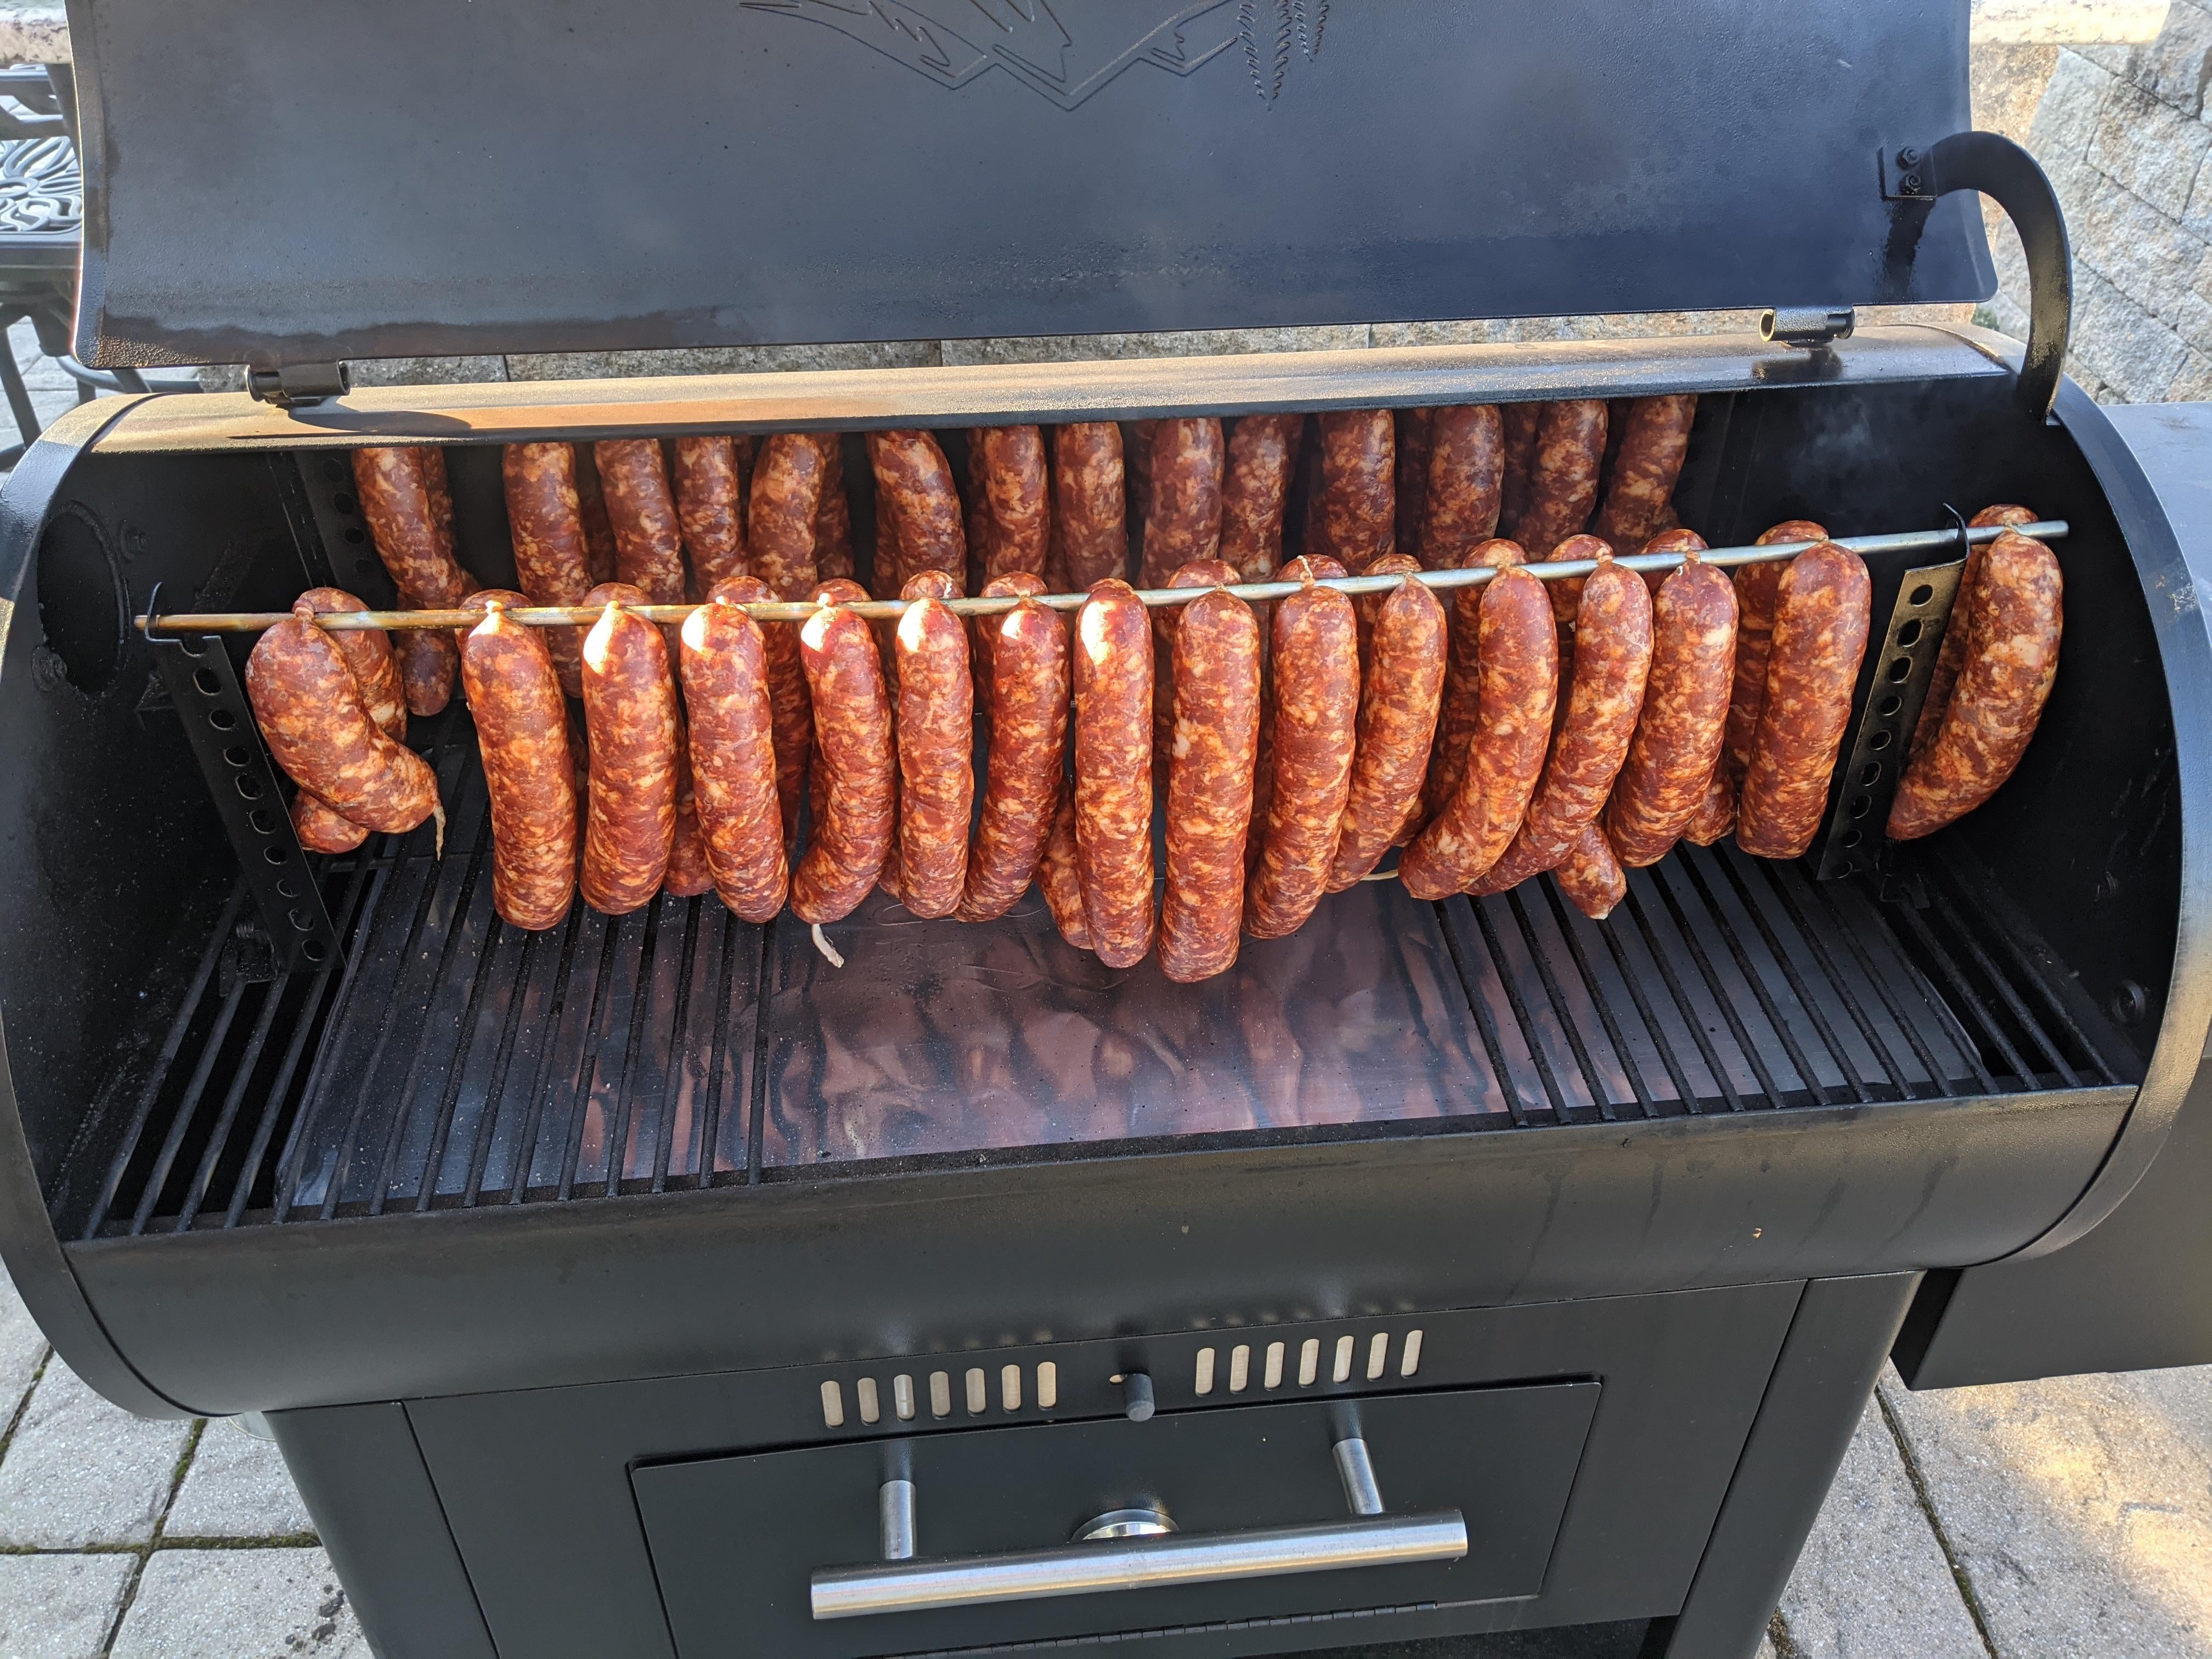 Grilled Smoked Sausage - Out Grilling